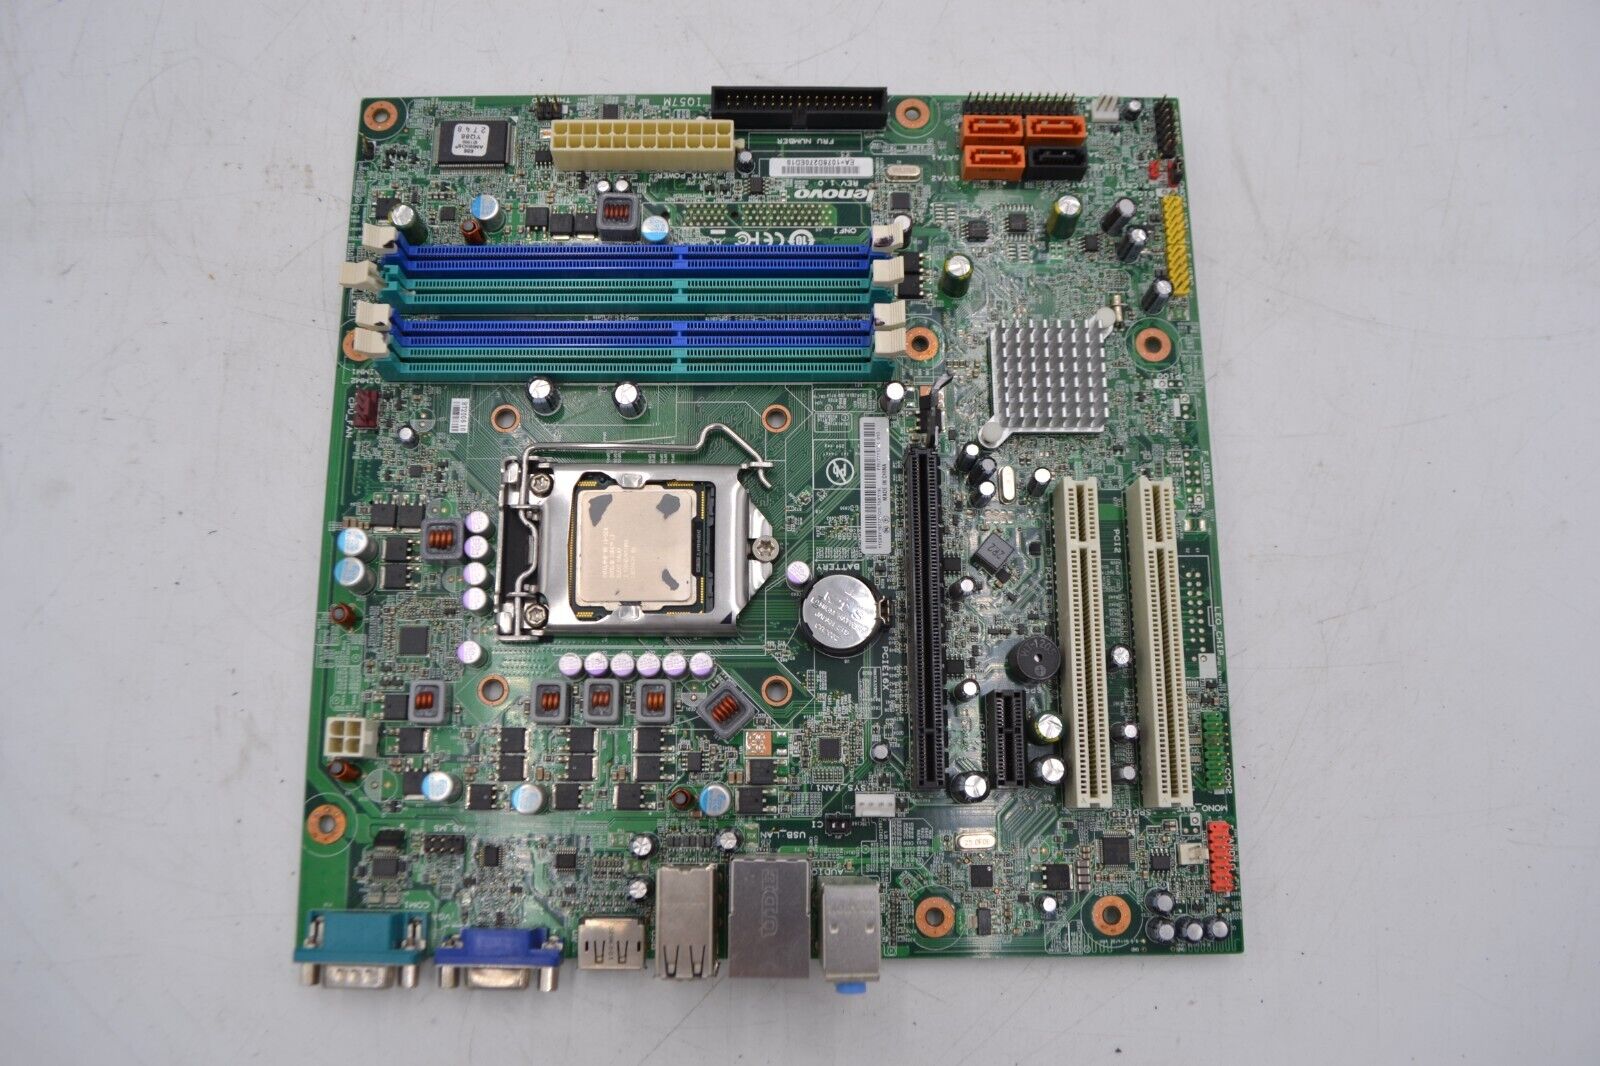 LOT OF 10 Lenovo ThinkCentre M90p LGA1156 DDR3 Motherboard  71Y5974 with I3 cpu